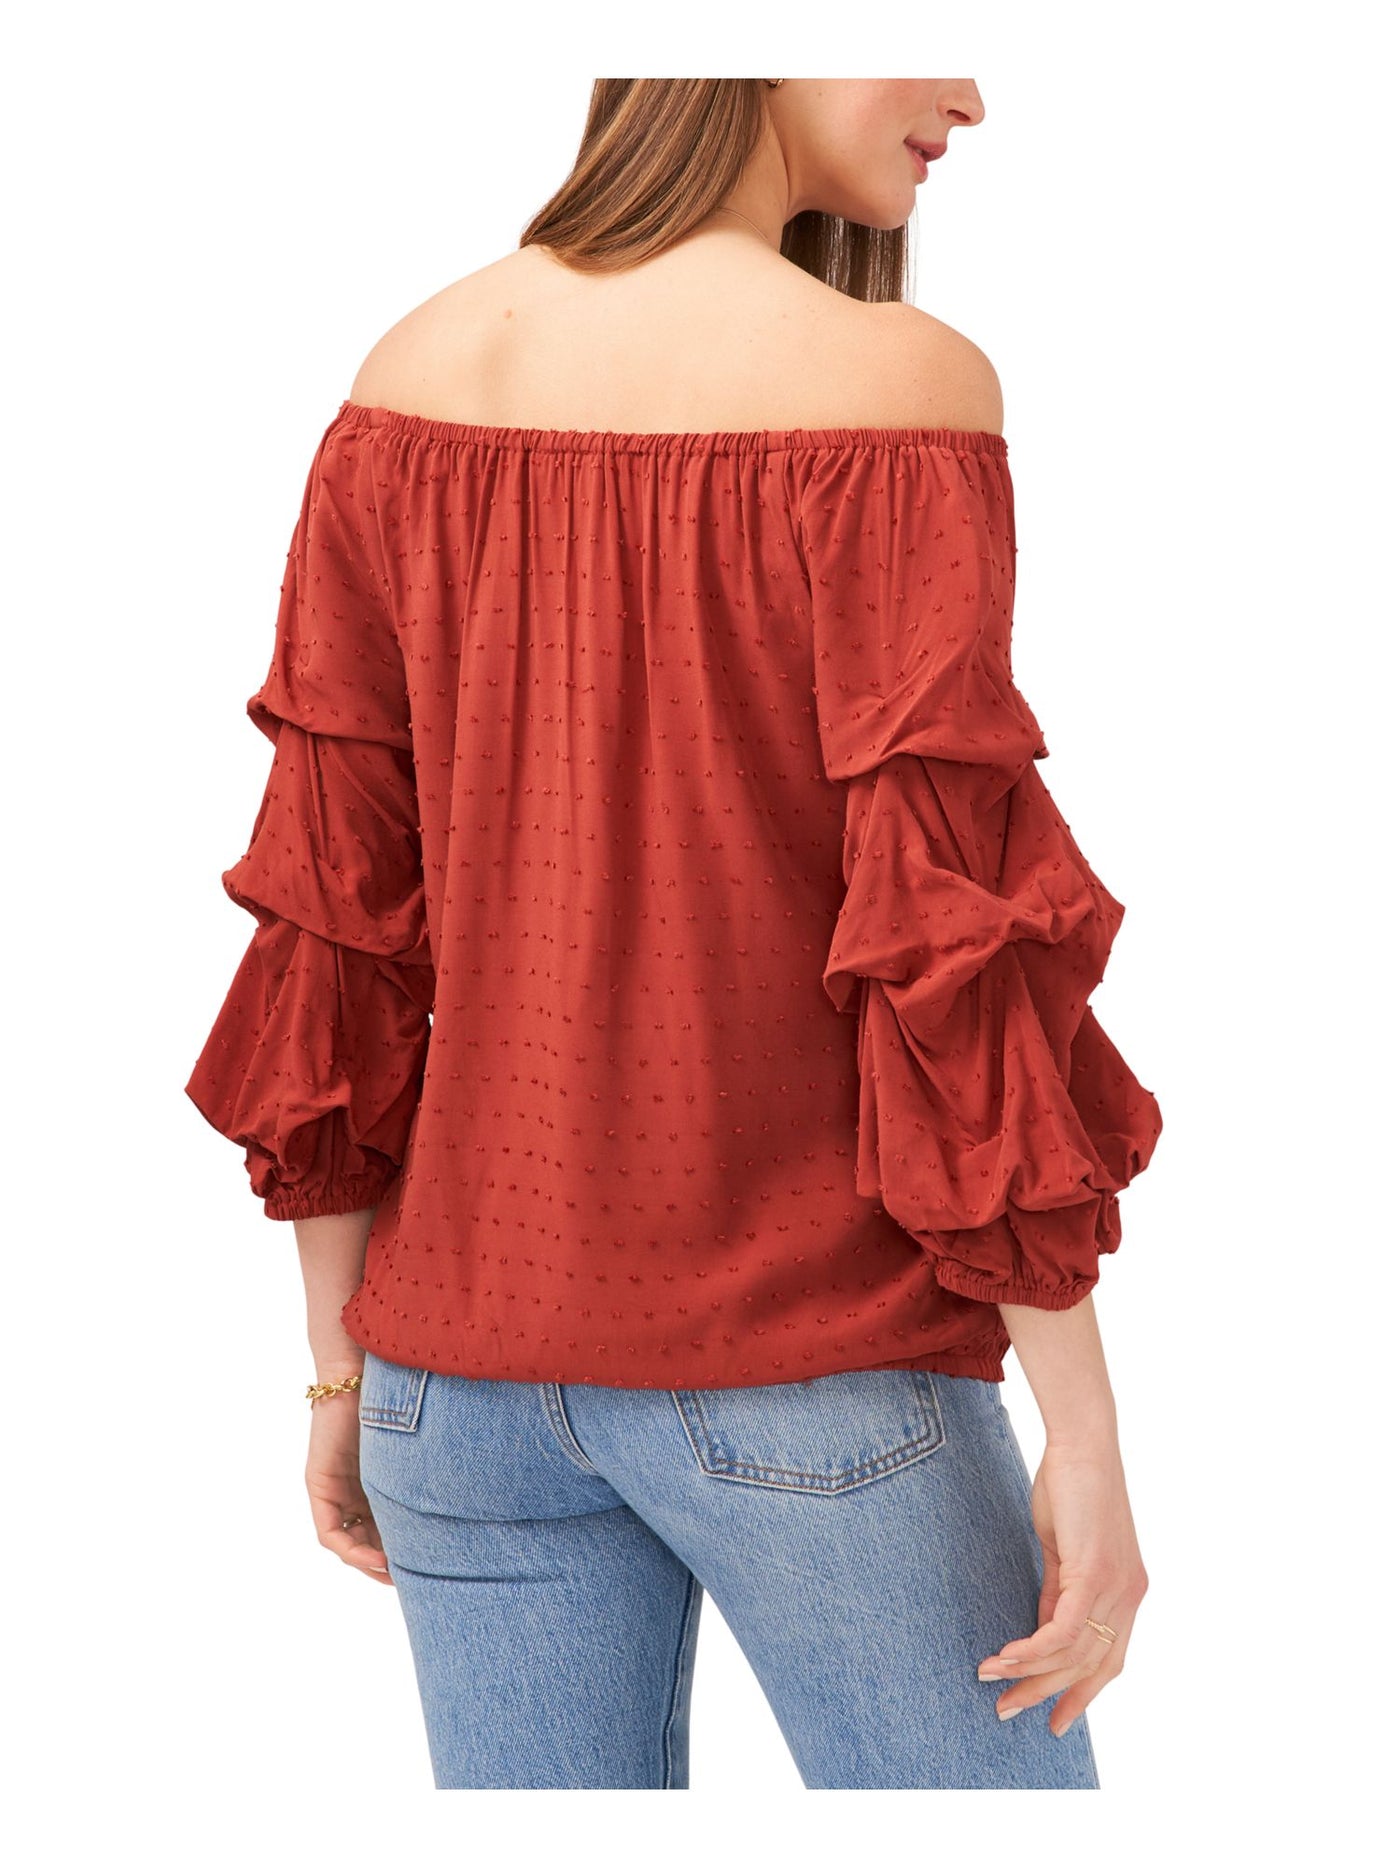 VINCE CAMUTO Womens Brown Ruffled 3/4 Sleeve Off Shoulder Party Top XS